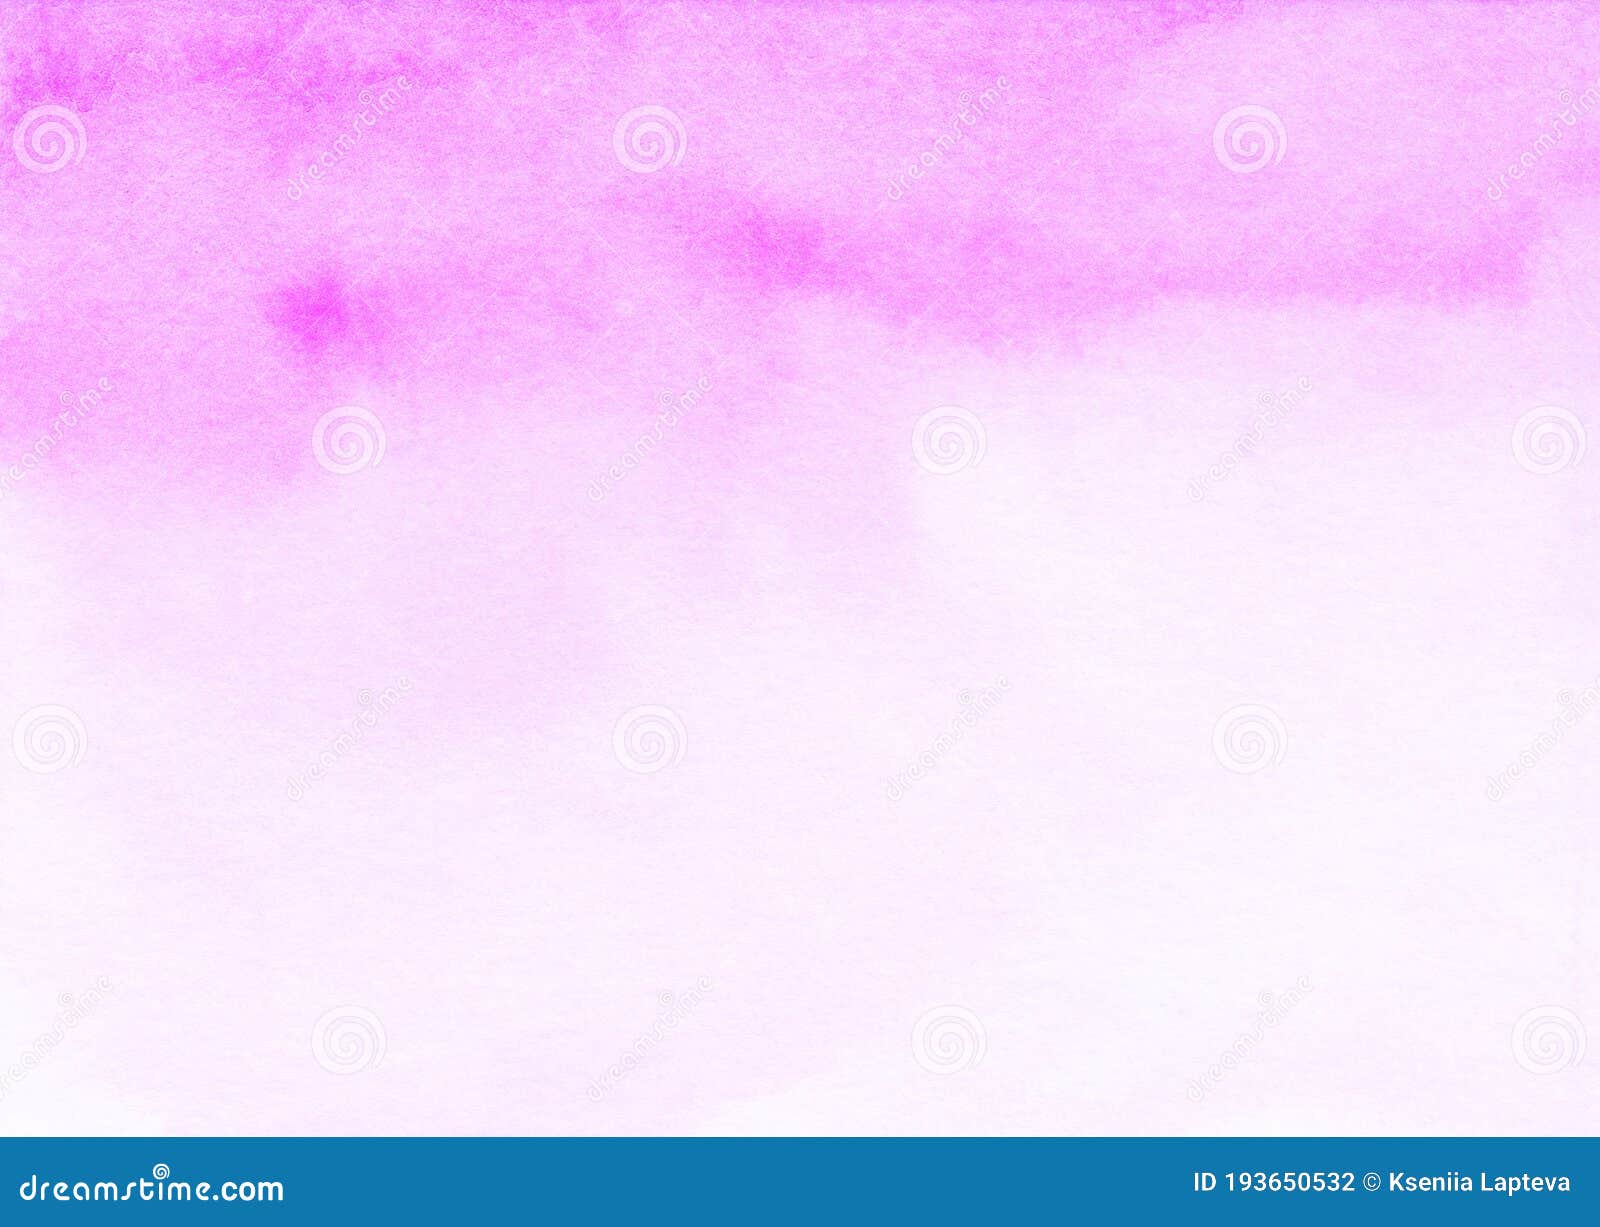 Watercolor Light Pink Ombre Background Texture. Watercolour Abstract Bright Pink Gradient Backdrop Stock Photo - Image Of Background, Modern: 193650532